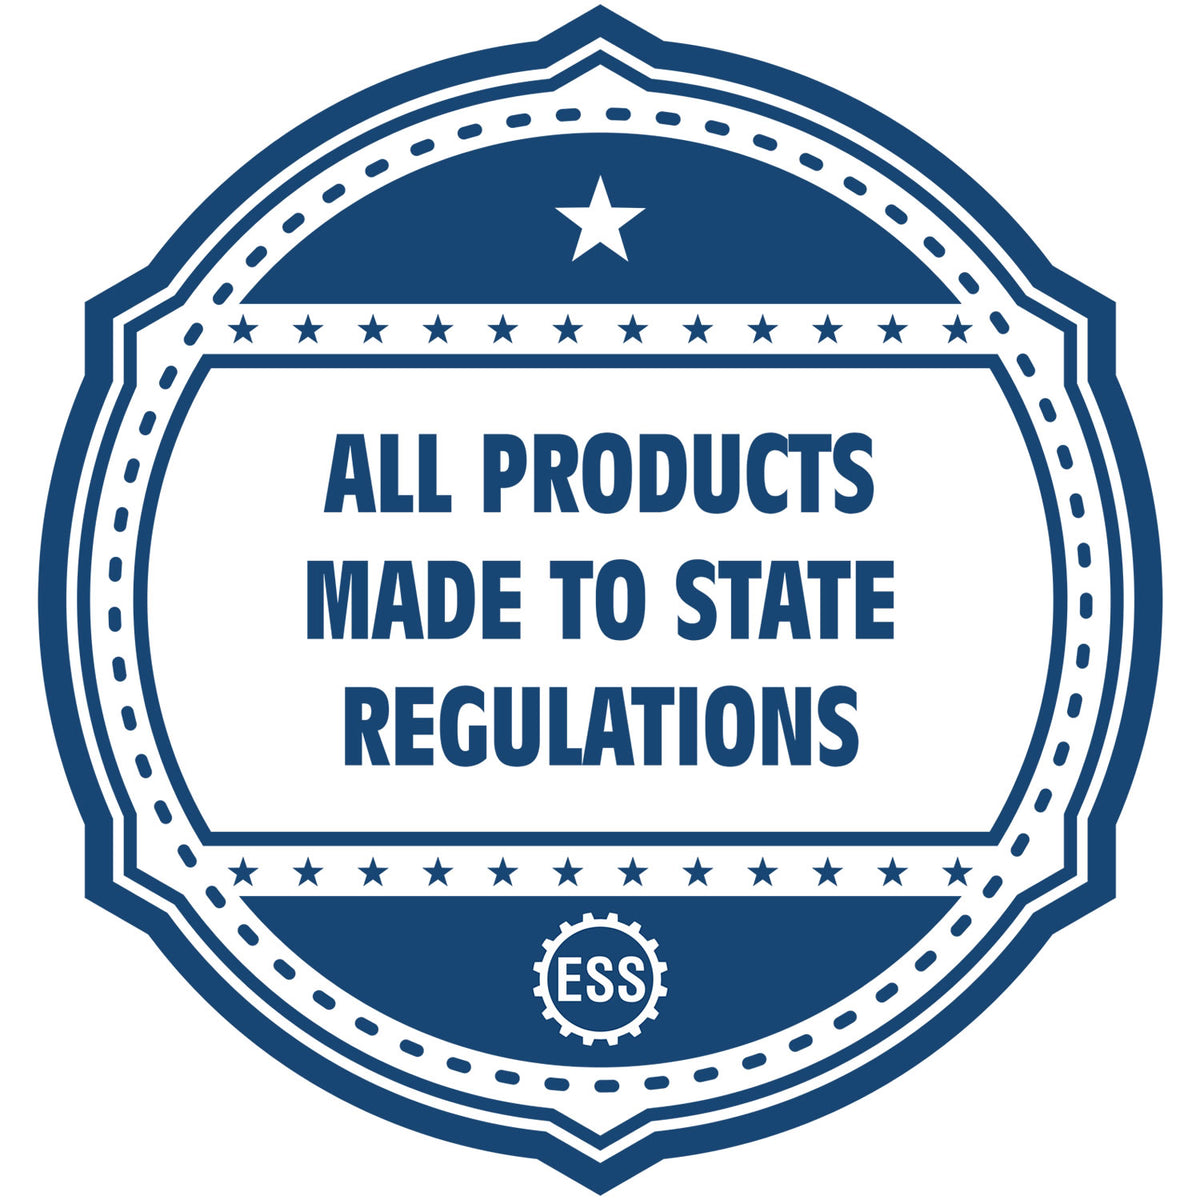 An icon or badge element for the South Dakota Desk Architect Embossing Seal showing that this product is made in compliance with state regulations.